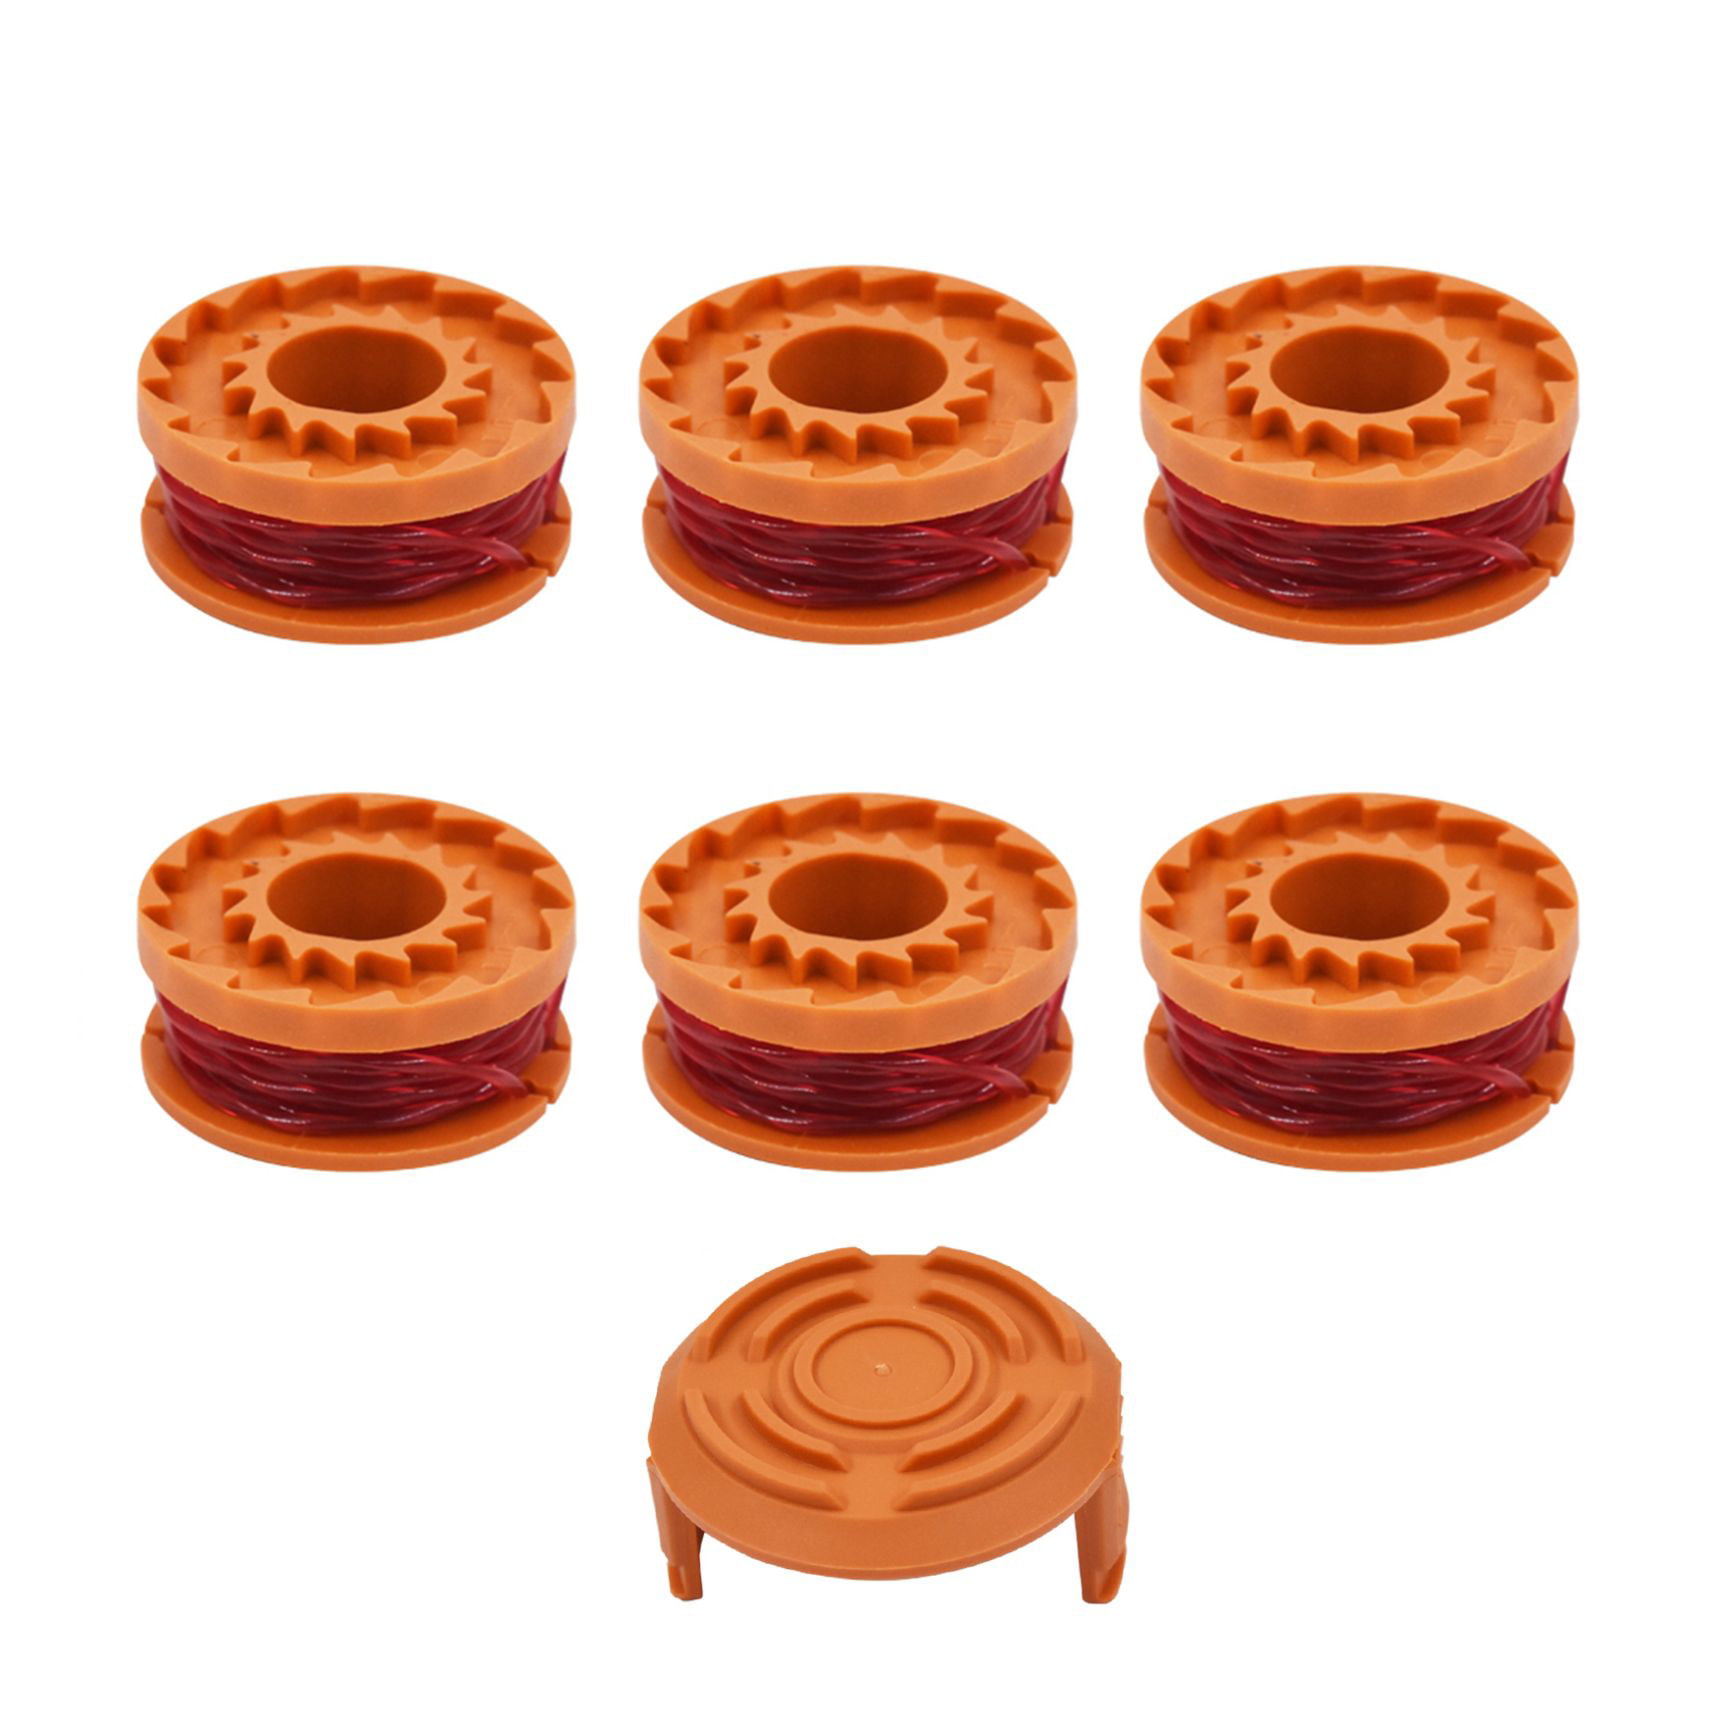 6x WORX WA0010 Replacement Spool Line For Grass Trimmer/Edger 10ft for WG150 GT* 